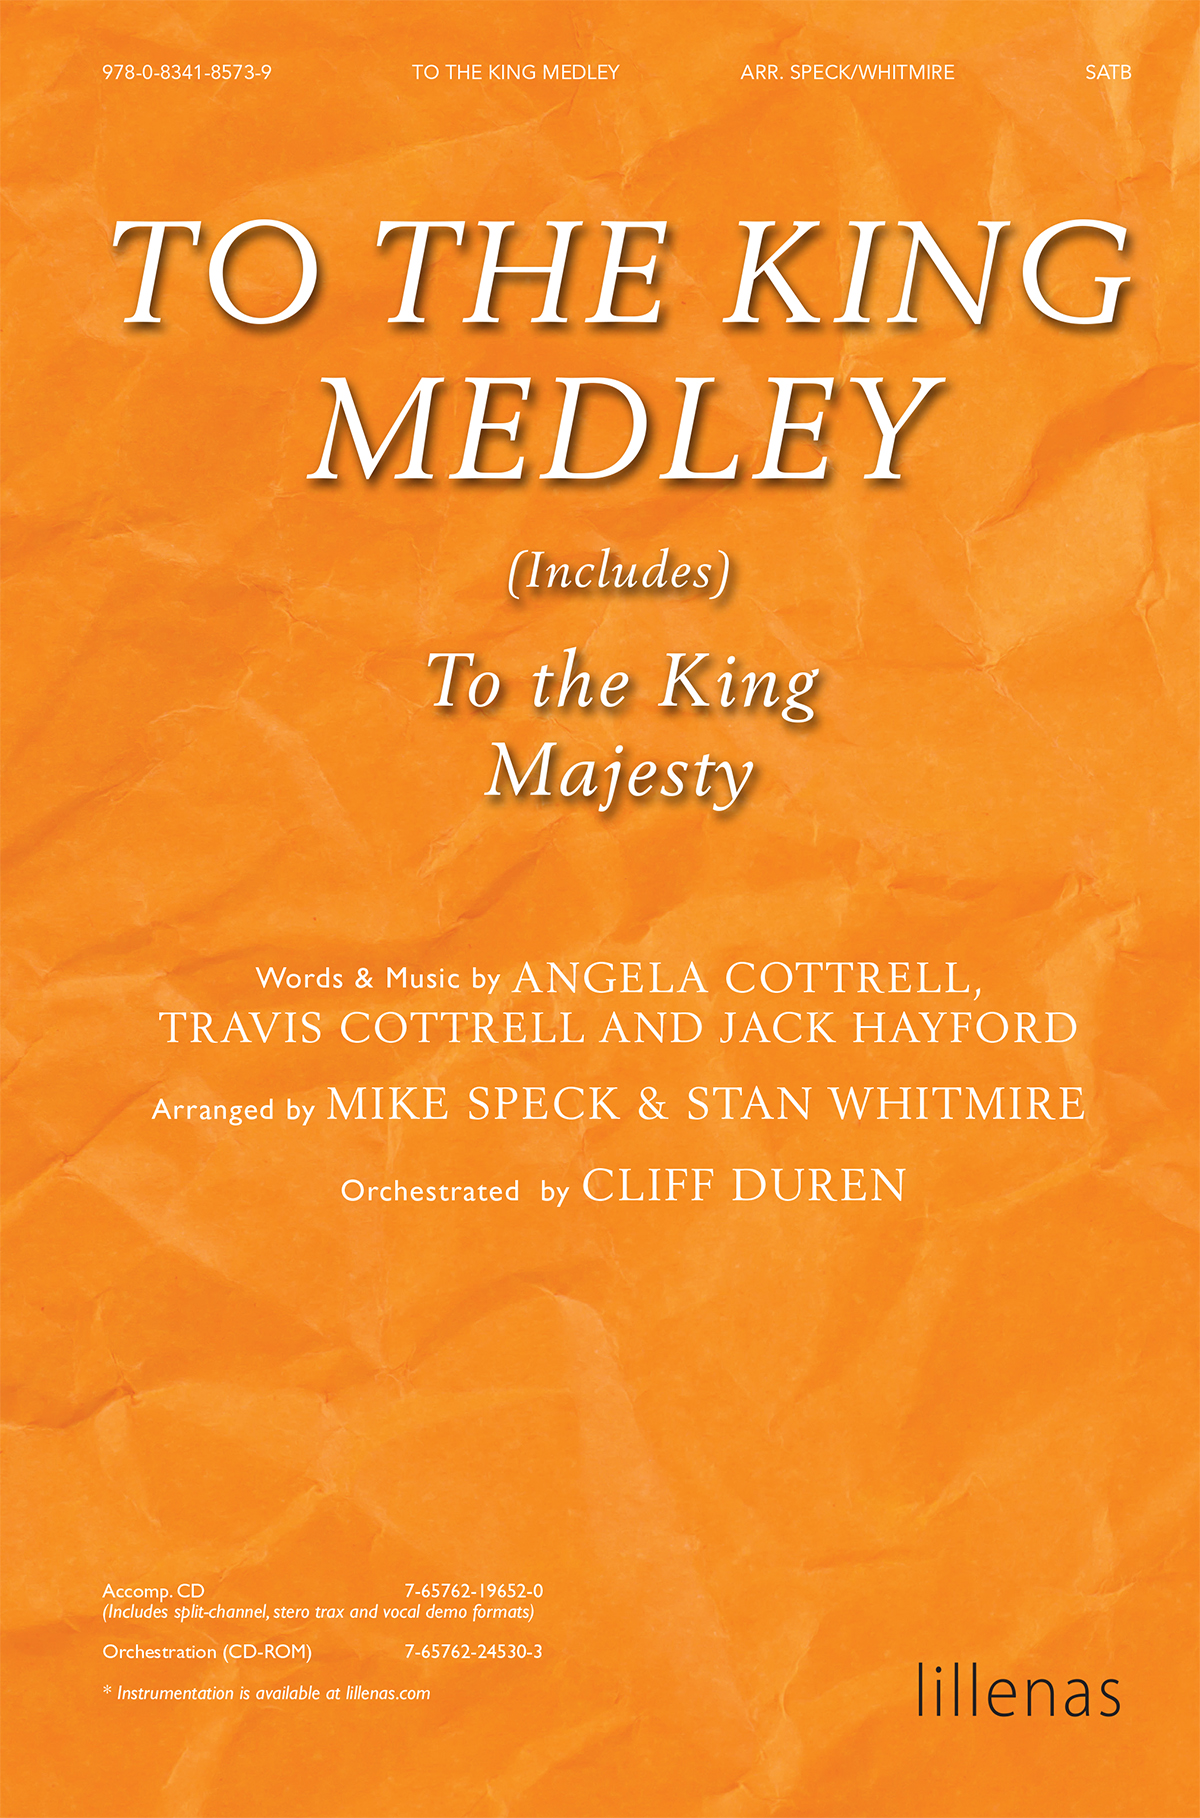 To the King Medley